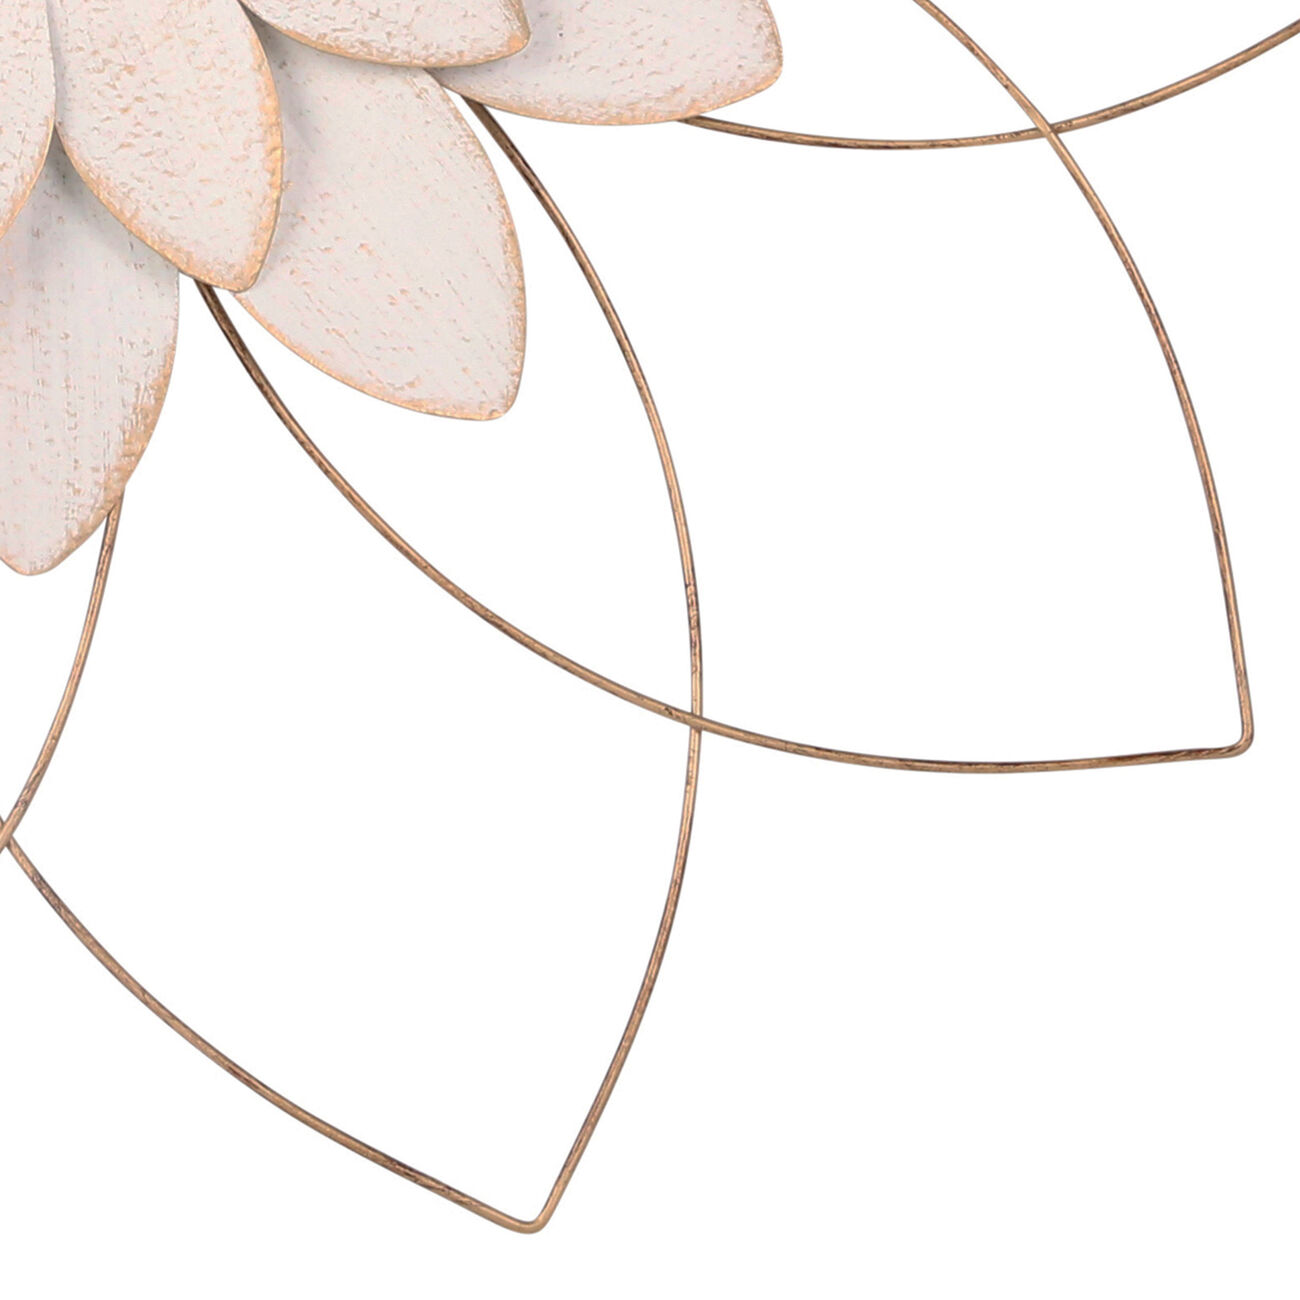 Contemporary Metal Wall Decor with Flower Design, Pink and Gold